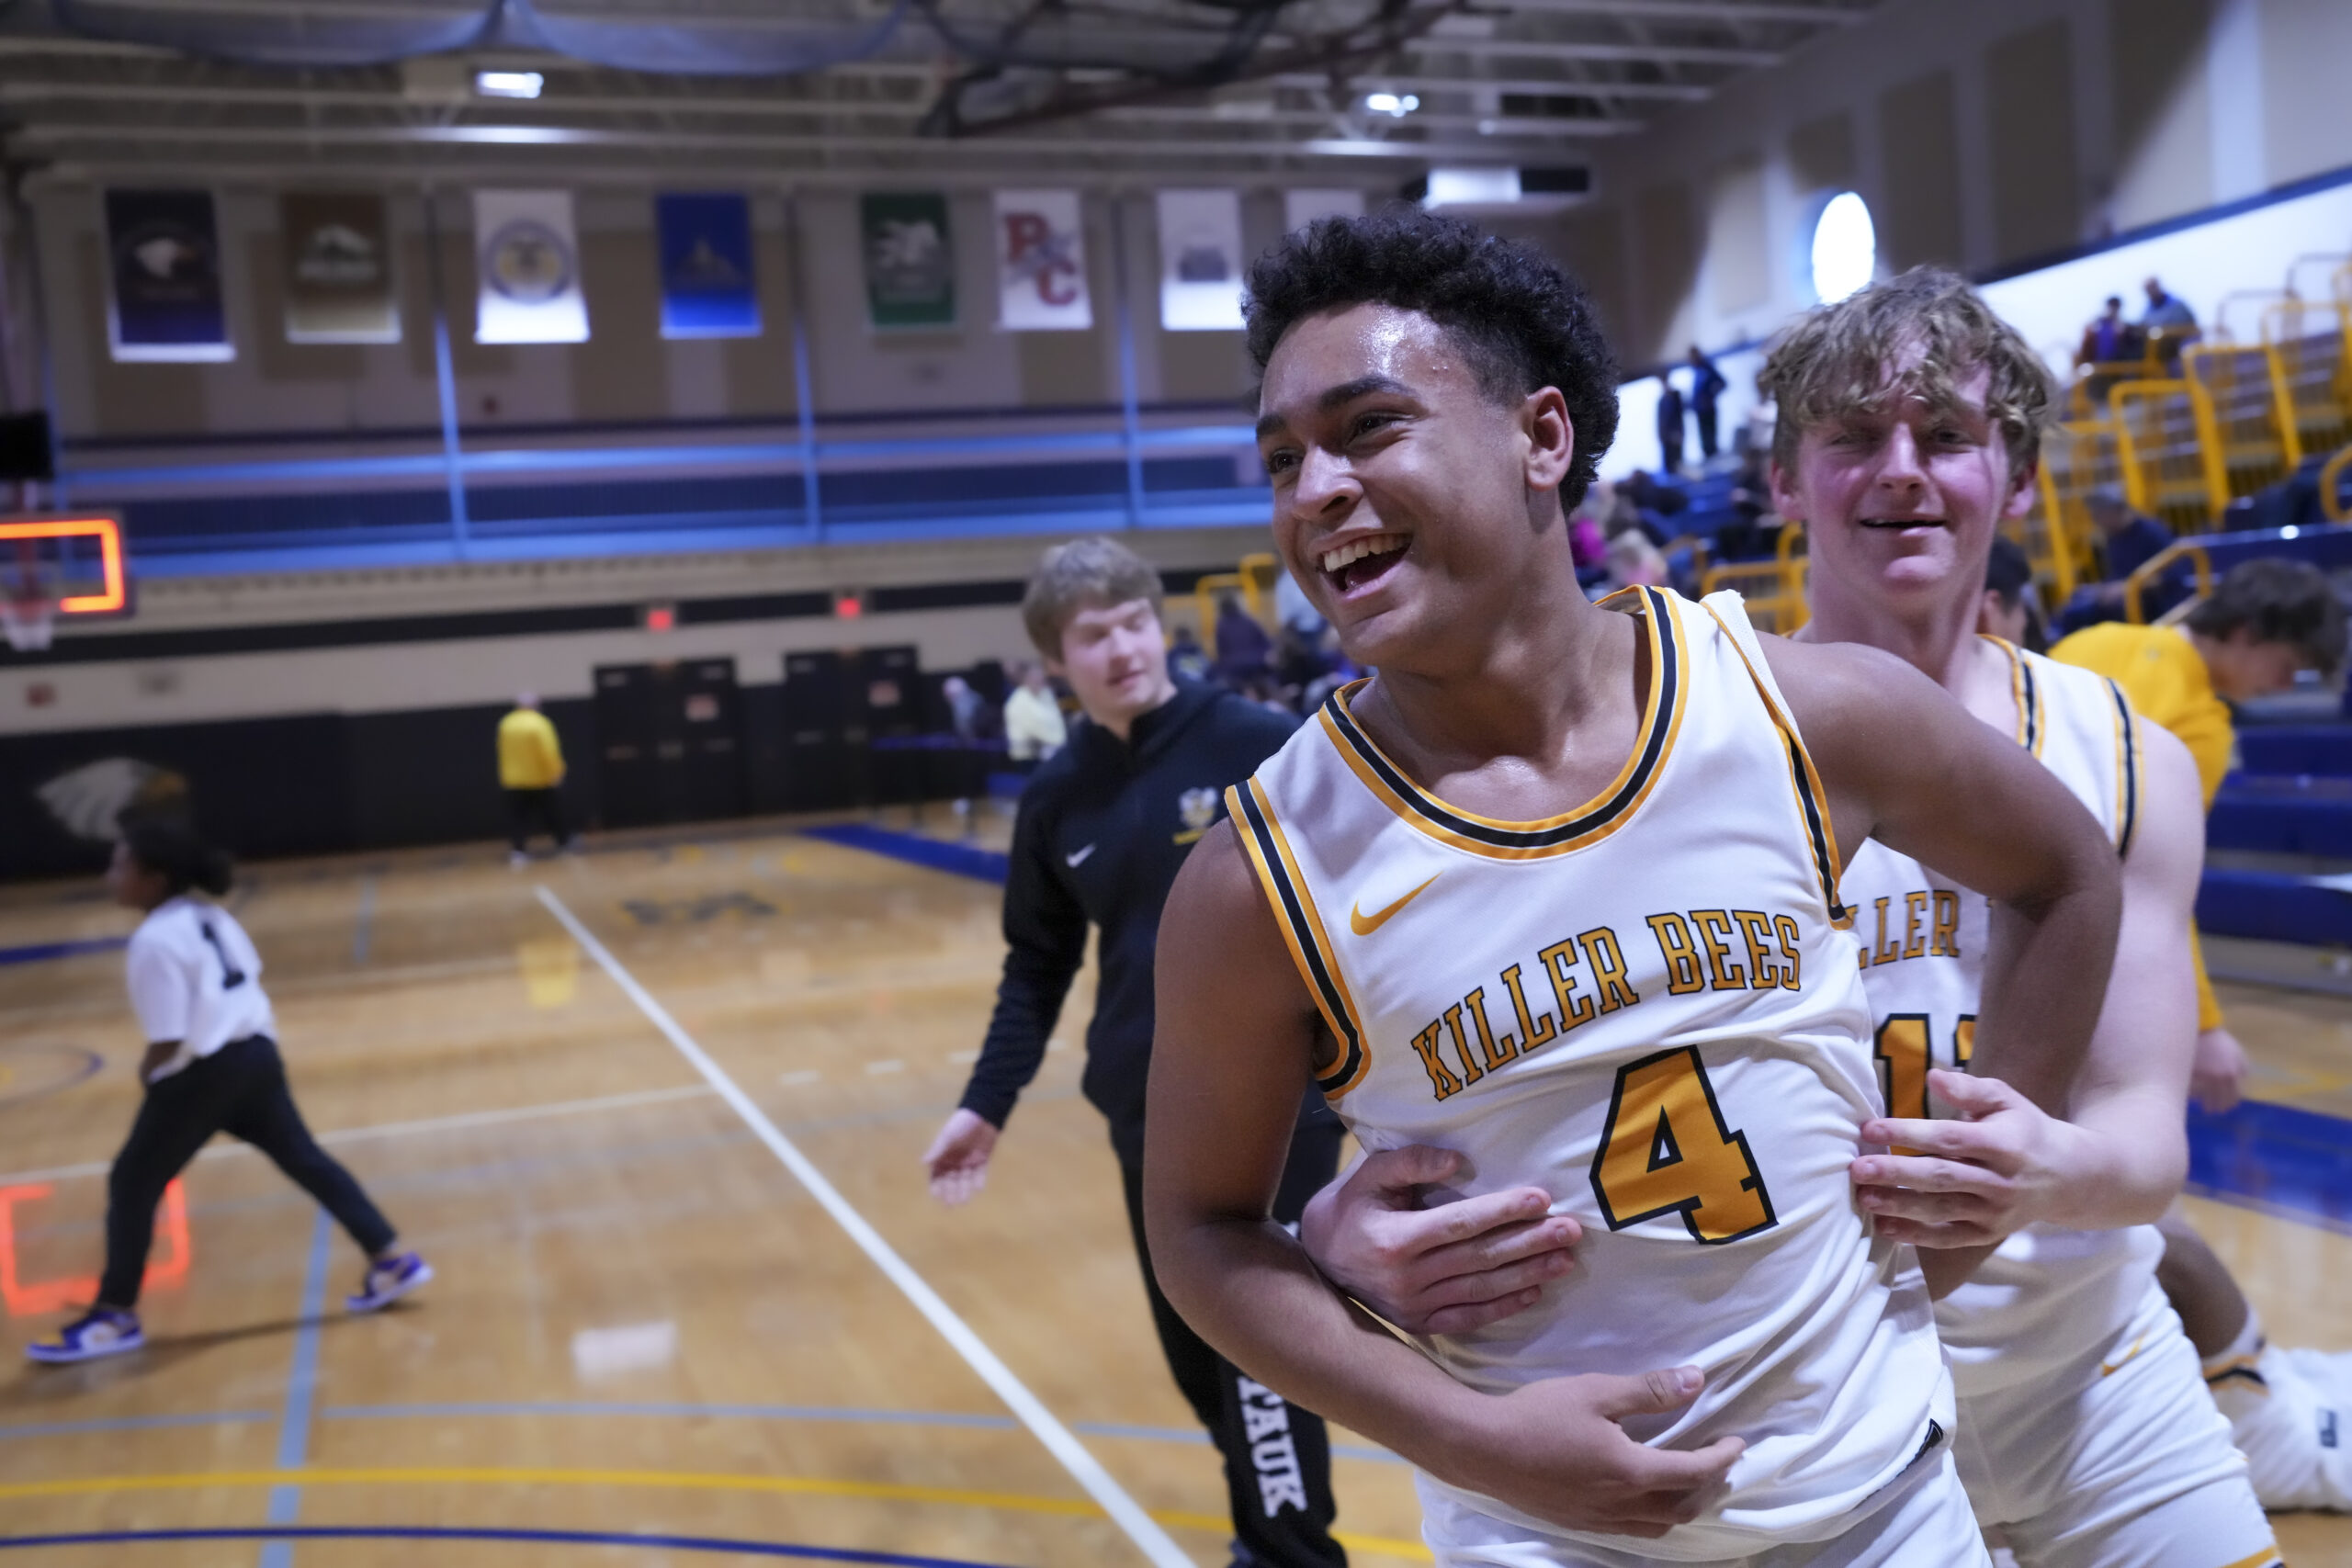 Alex Davis, Dylan Fitzgerald and the Bees were all smiles after the final buzzer went off.   RON ESPOSITO